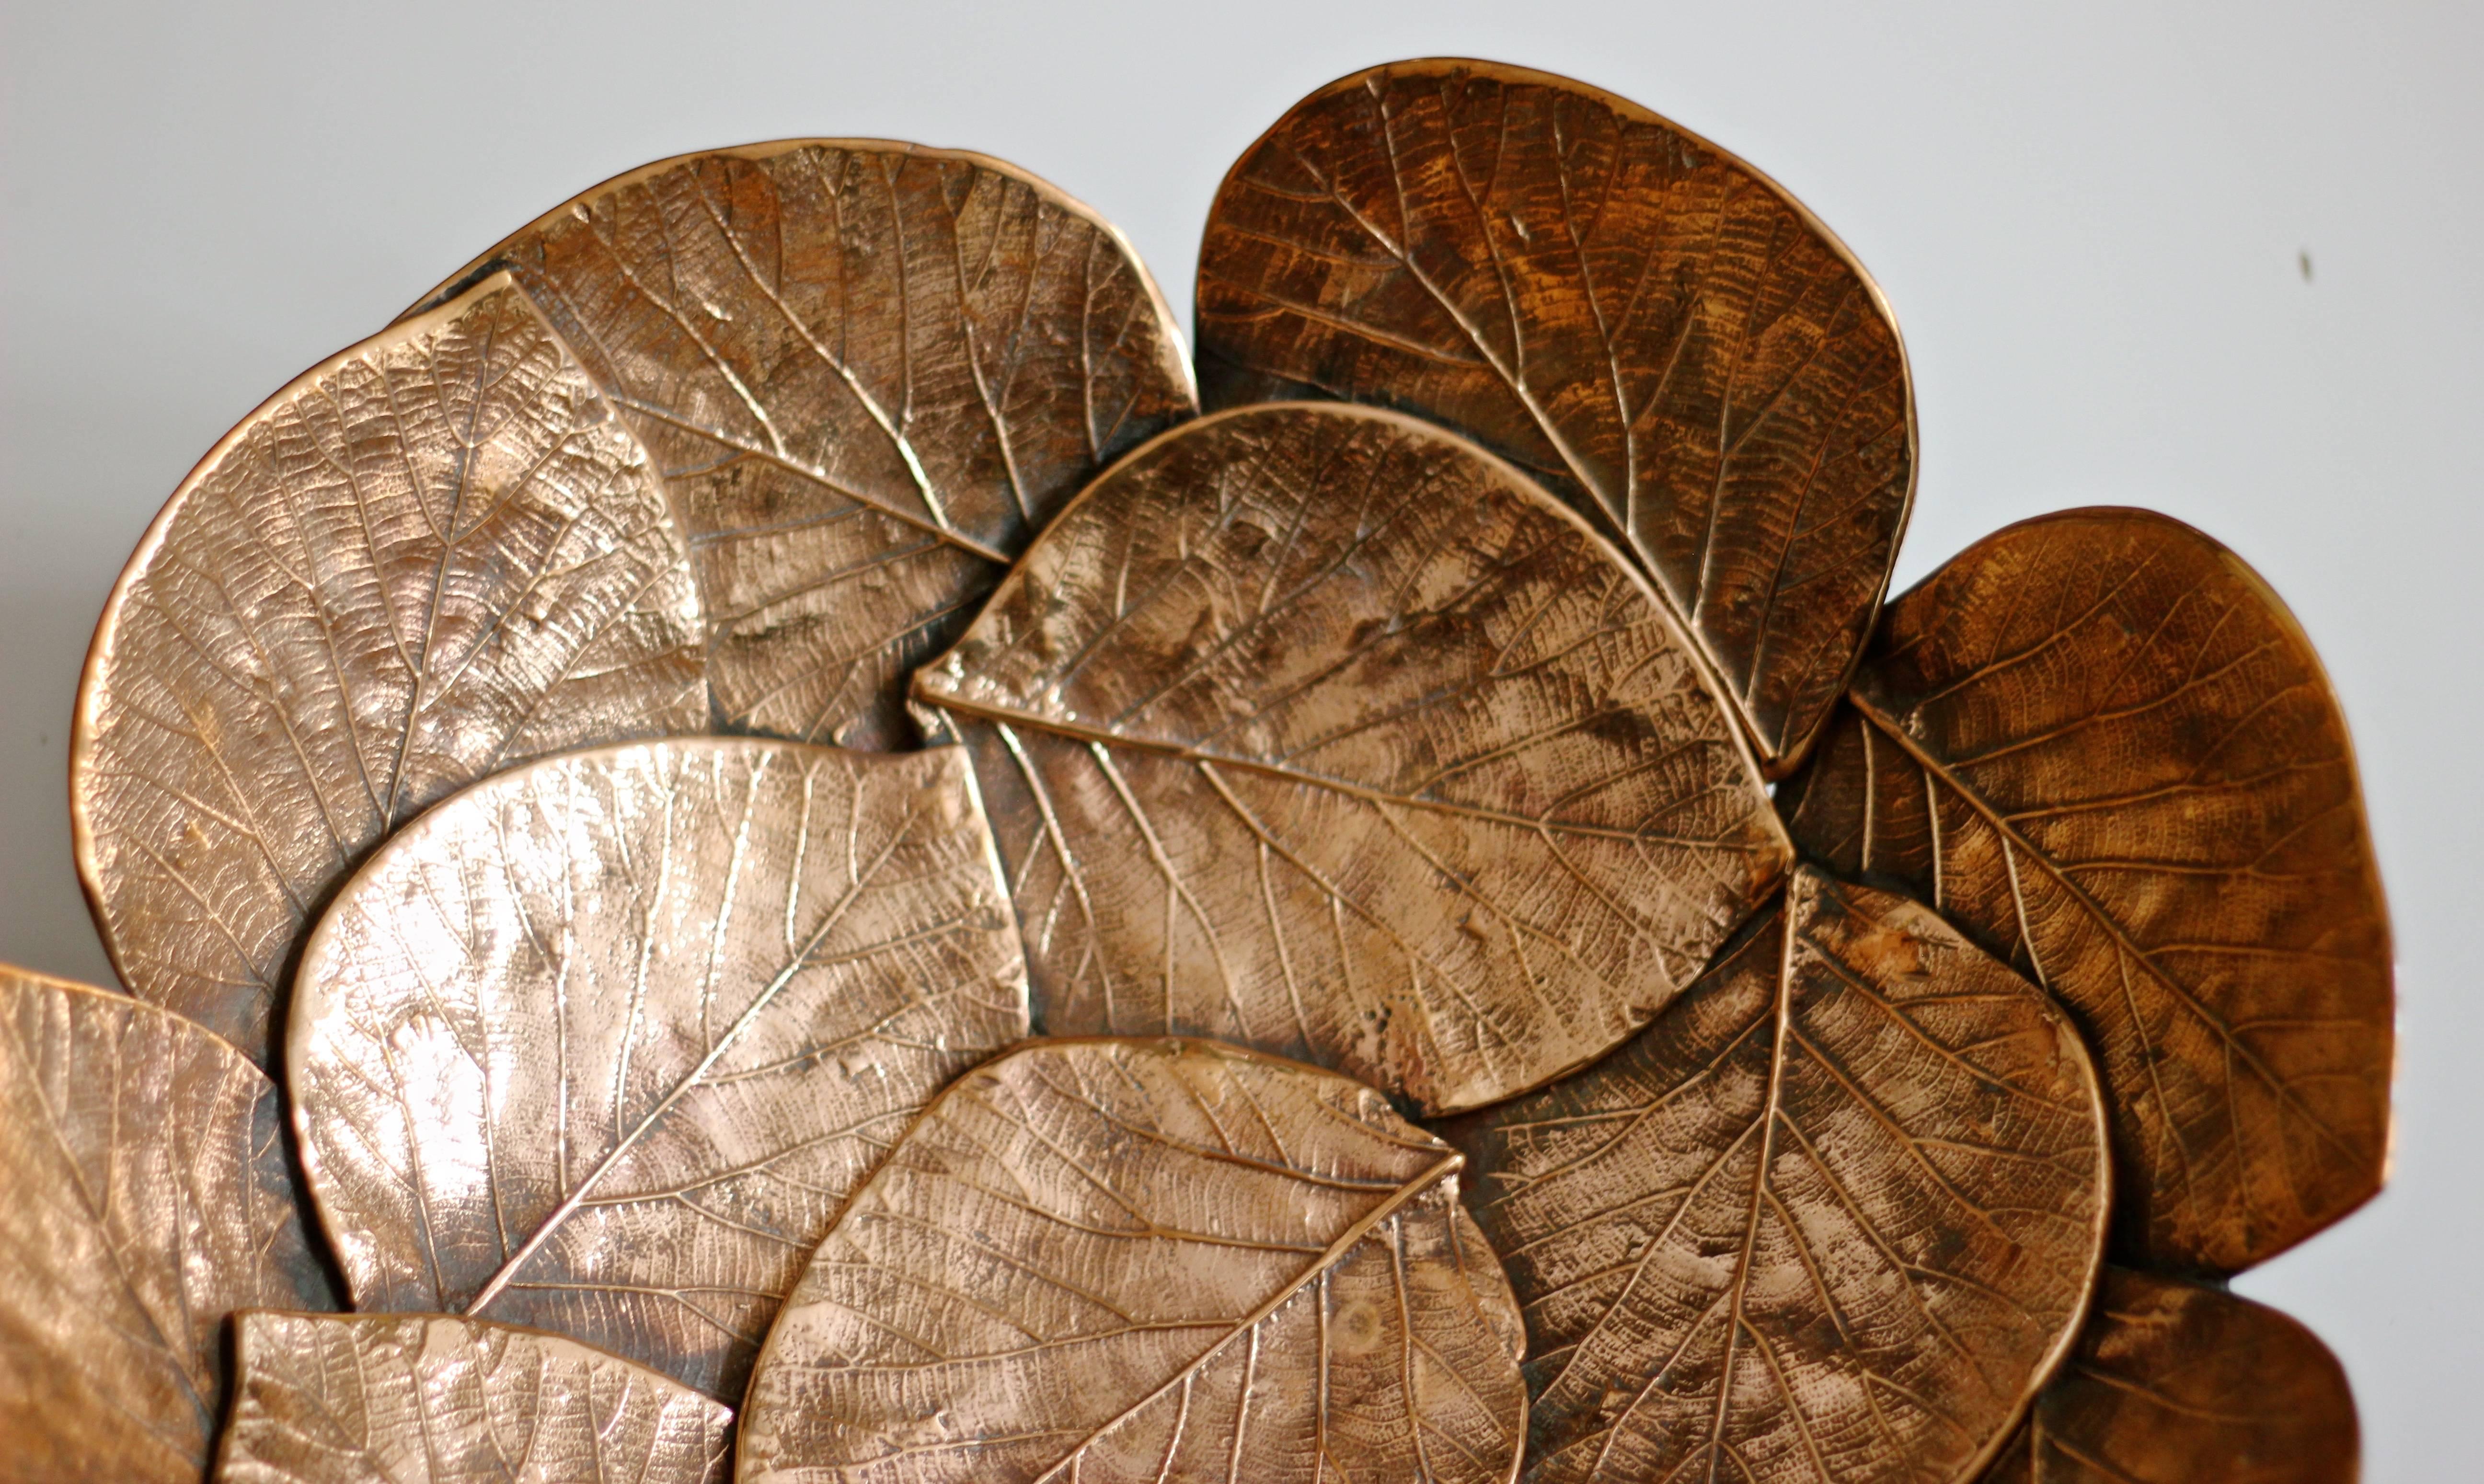 Unique and exquisite brass cast leaf bowl. Handmade using highly skilled and specialised traditional processes to create an original and sumptuous piece.

Slight variations in the patina and polished finishes, patterns and sizes are characteristics